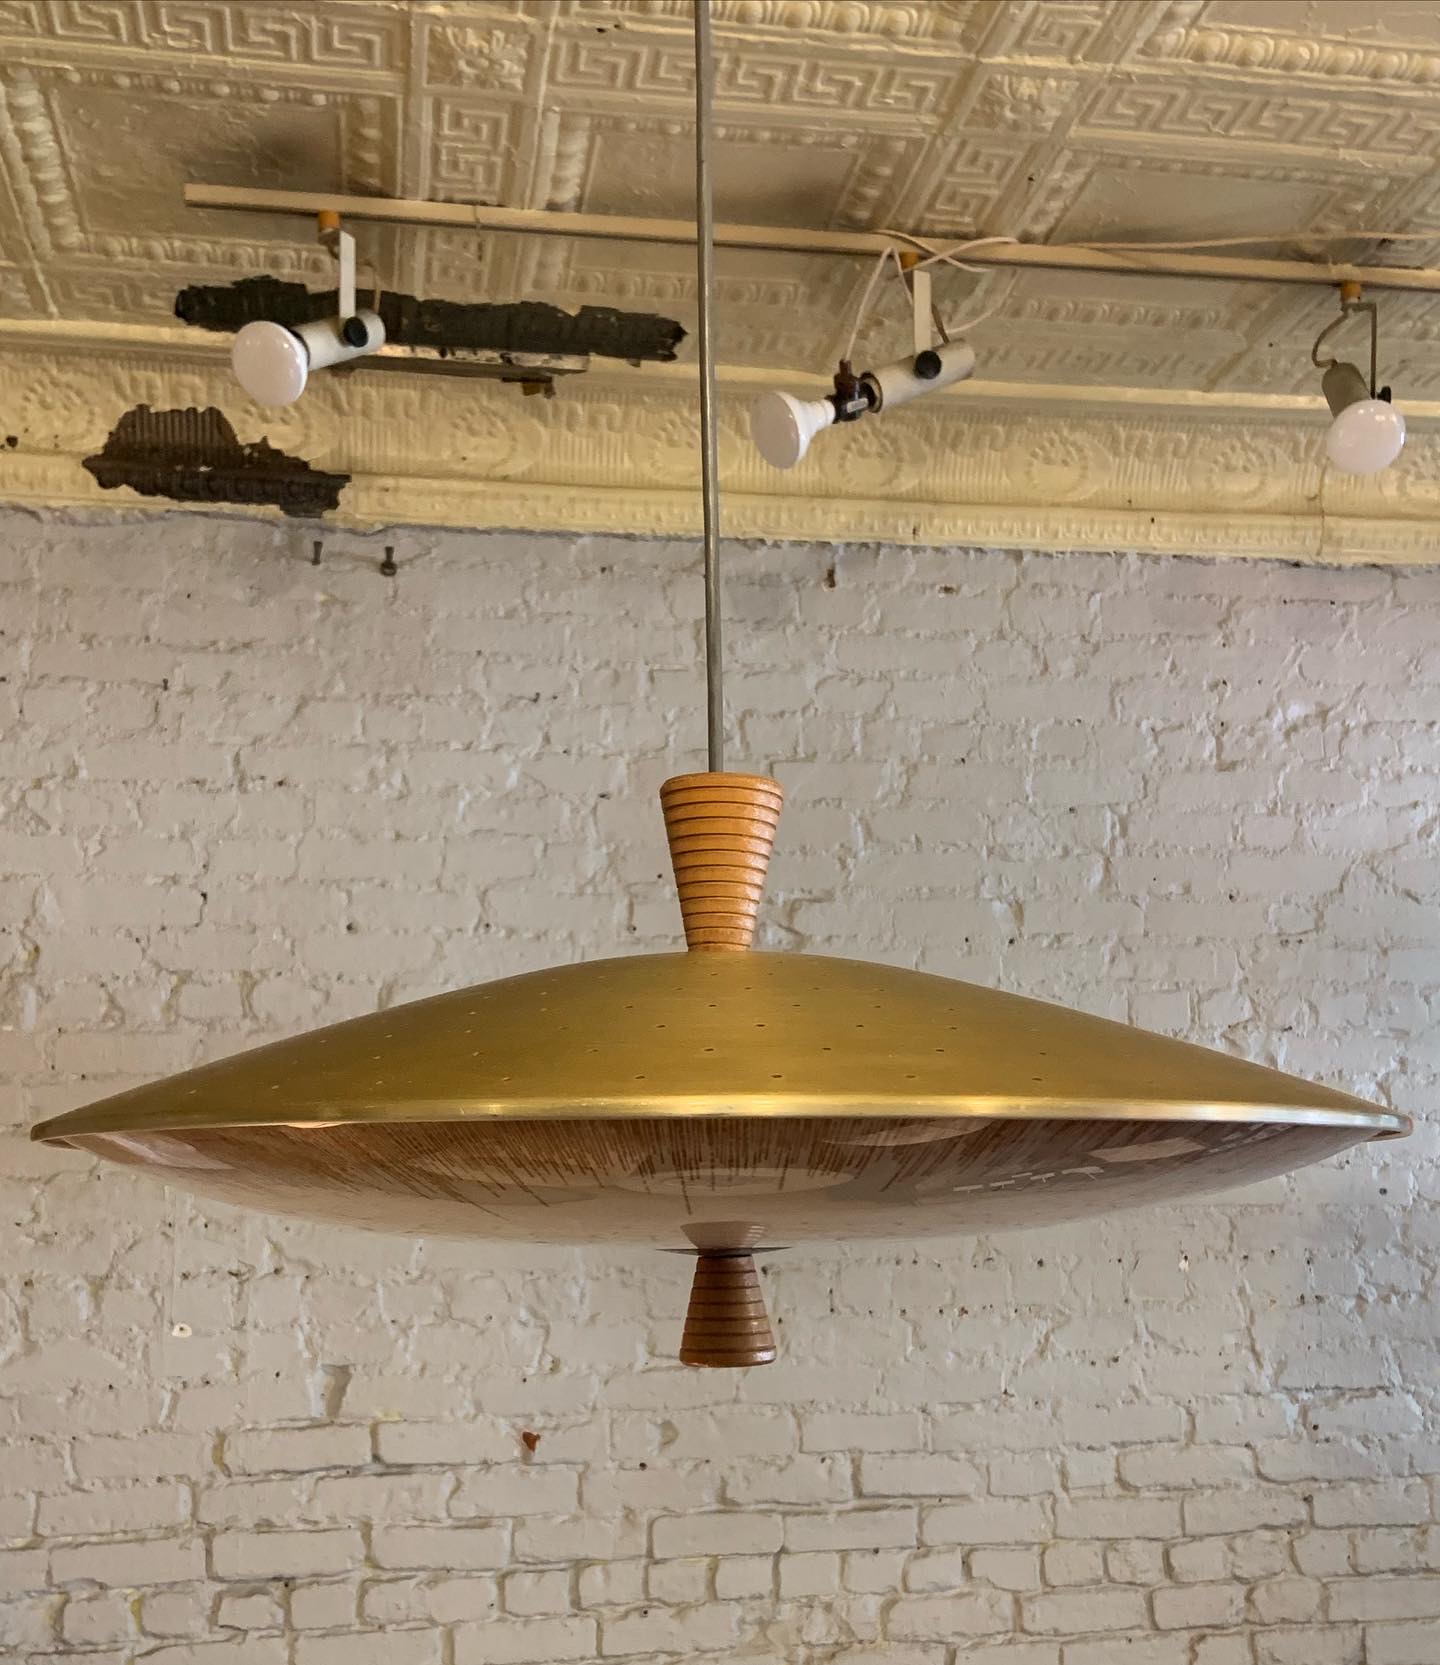 Perforated Brass & Glass Saucer Pendant Lamp from the 1950s – Mid